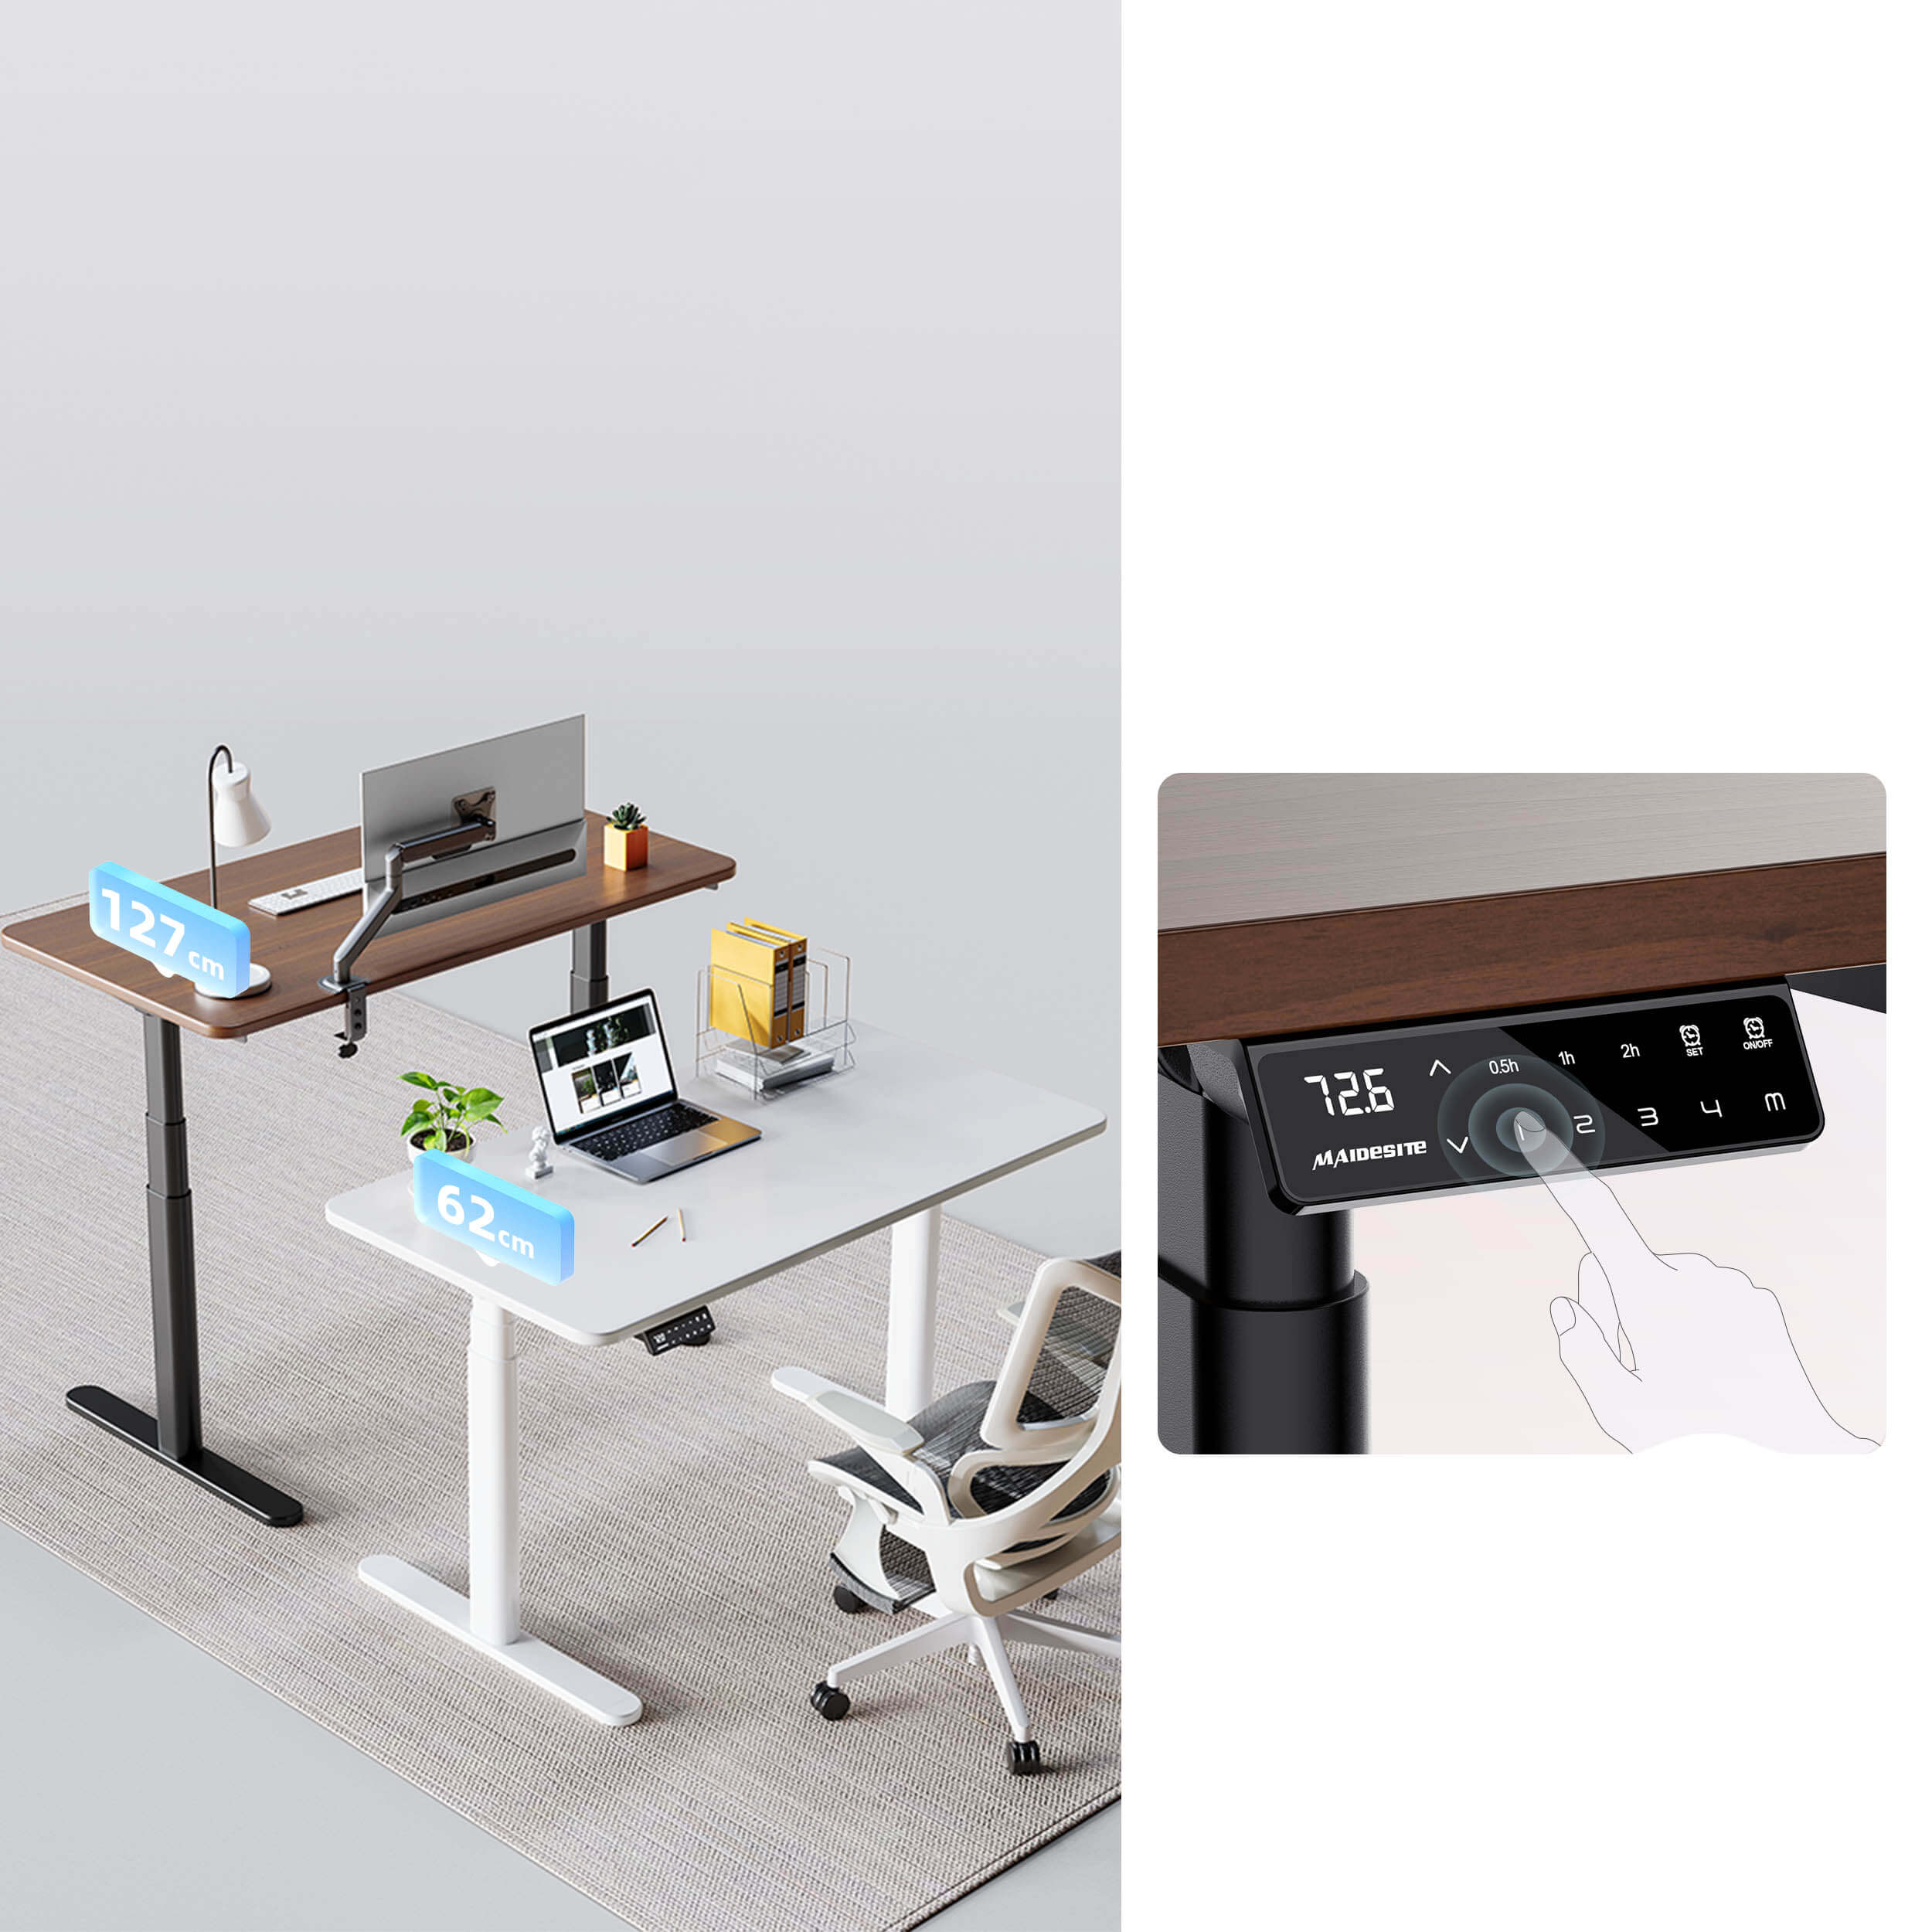 Maidesite TH2 Pro Plus standing desk frame is best for people study and work from home use